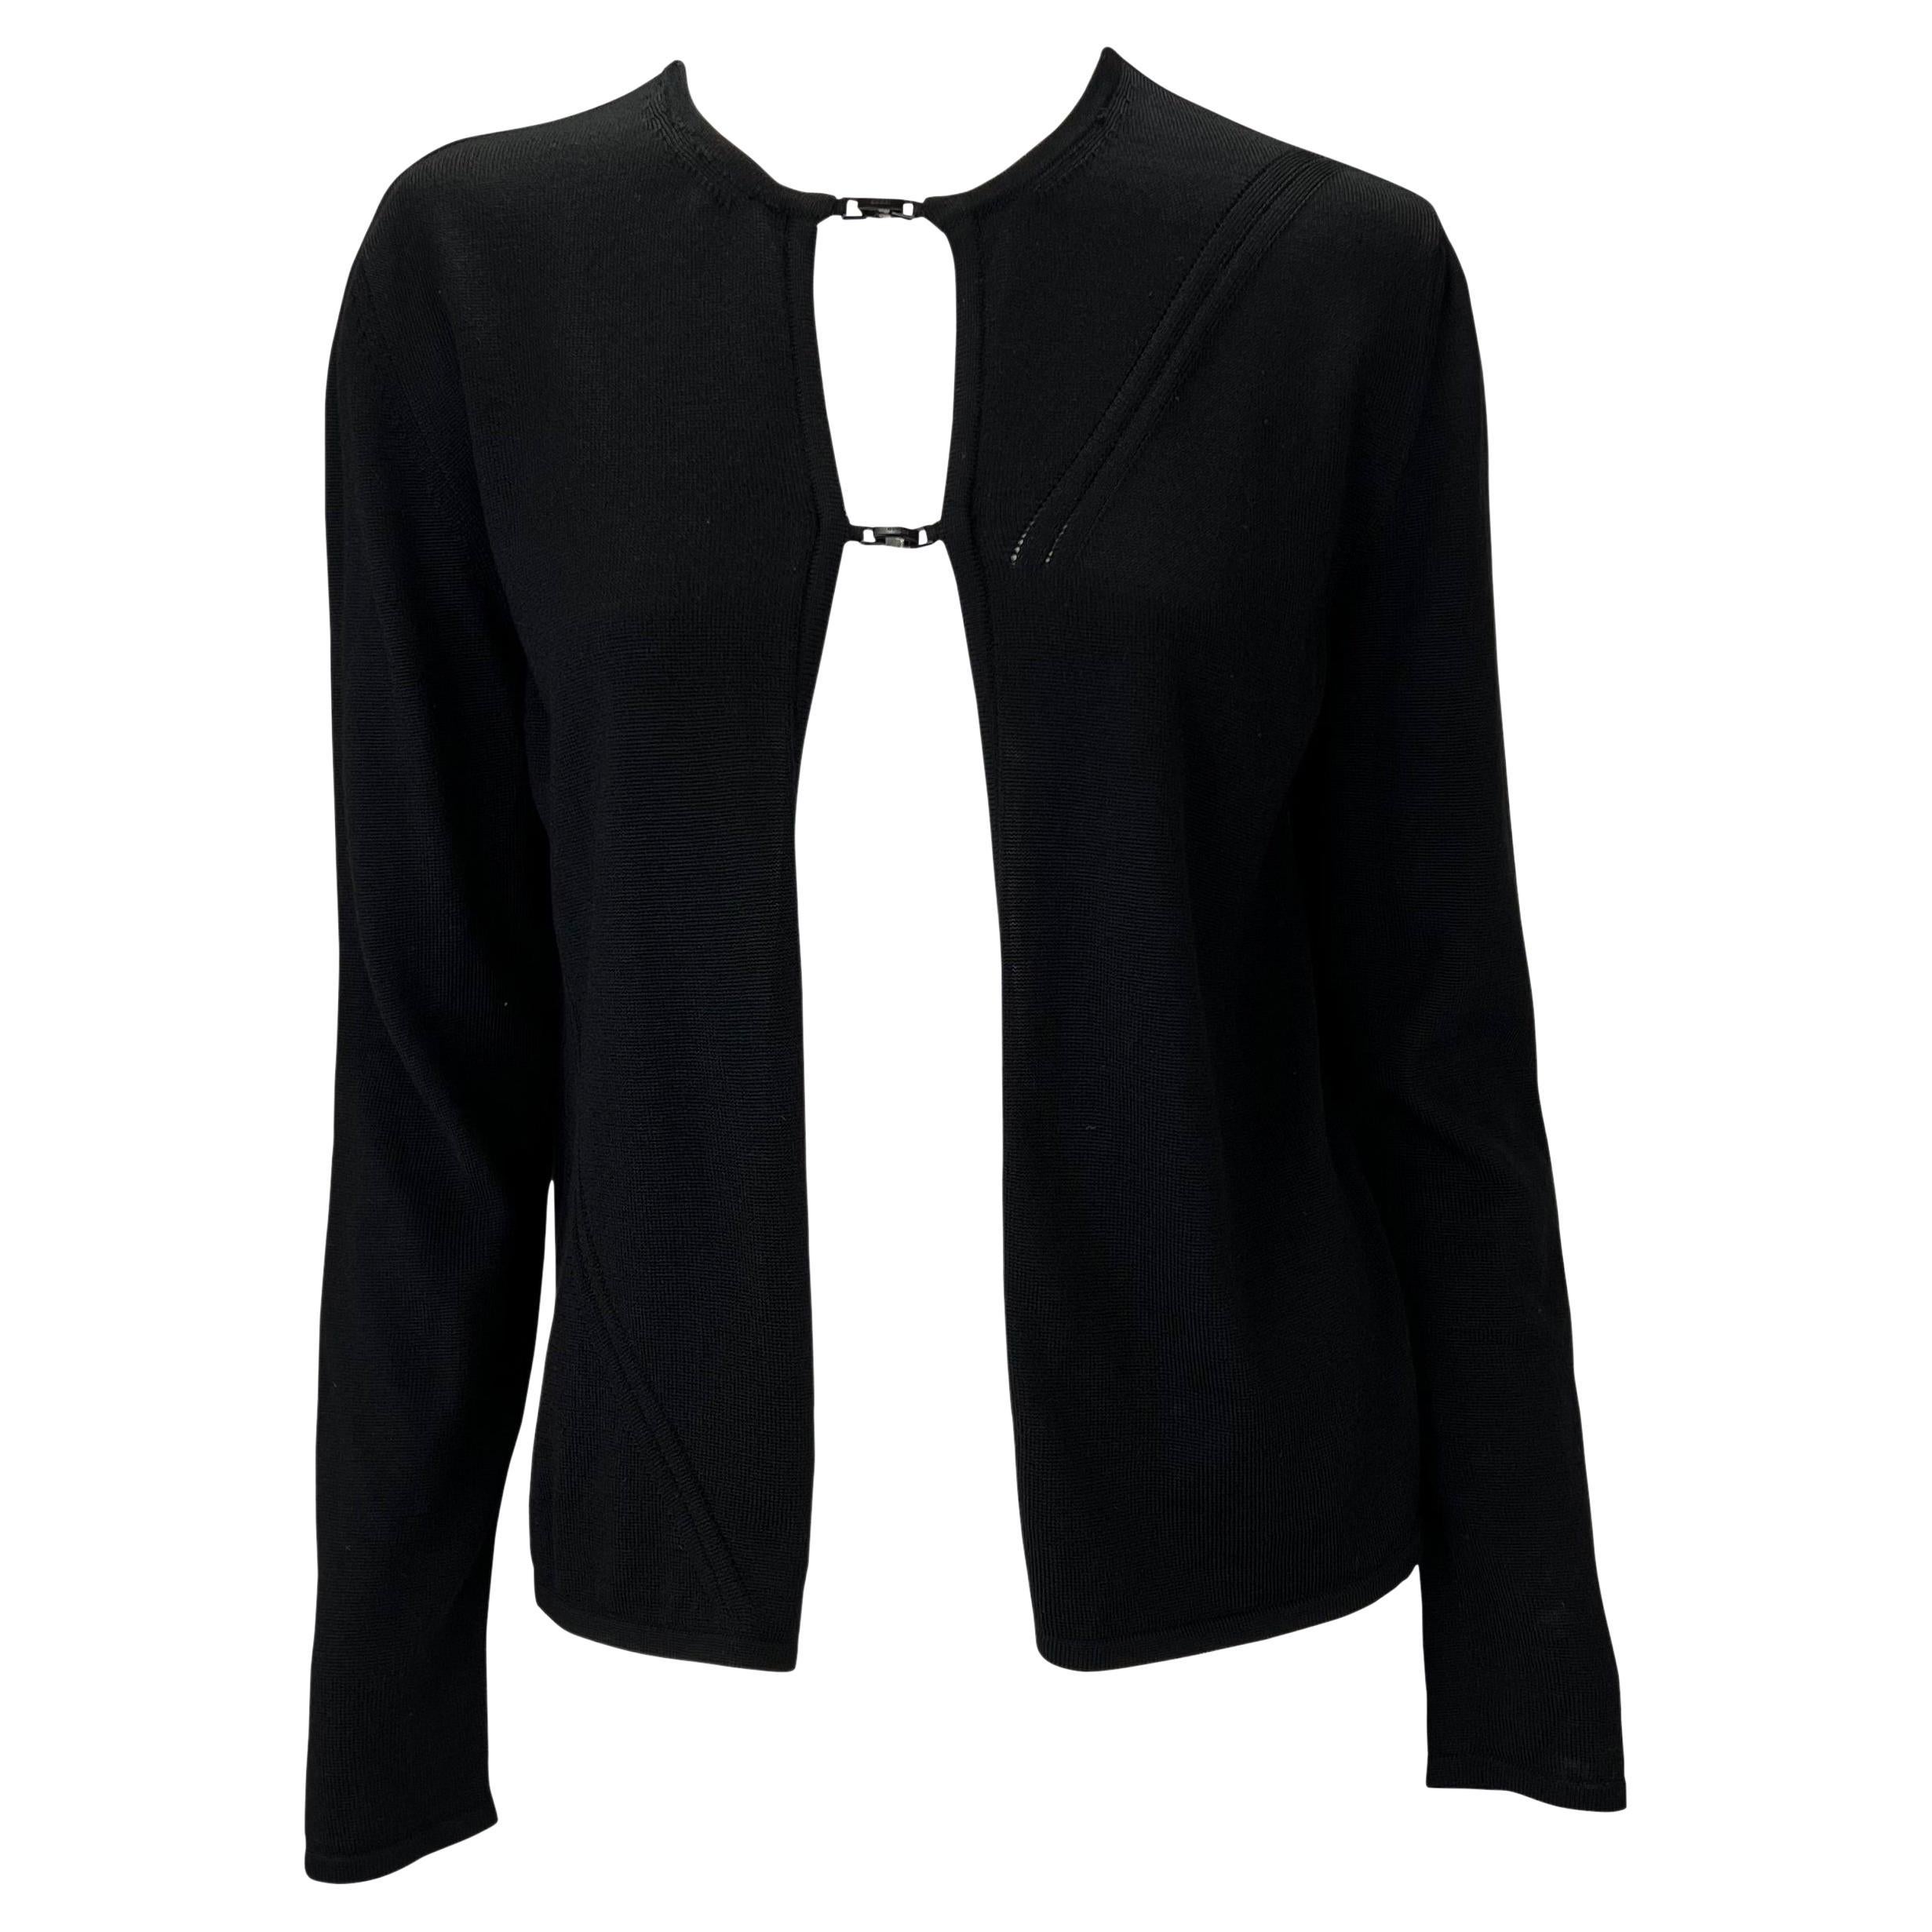 F/W 1998 Gucci by Tom Ford Double Buckle Black Knit Wool Cardigan Top